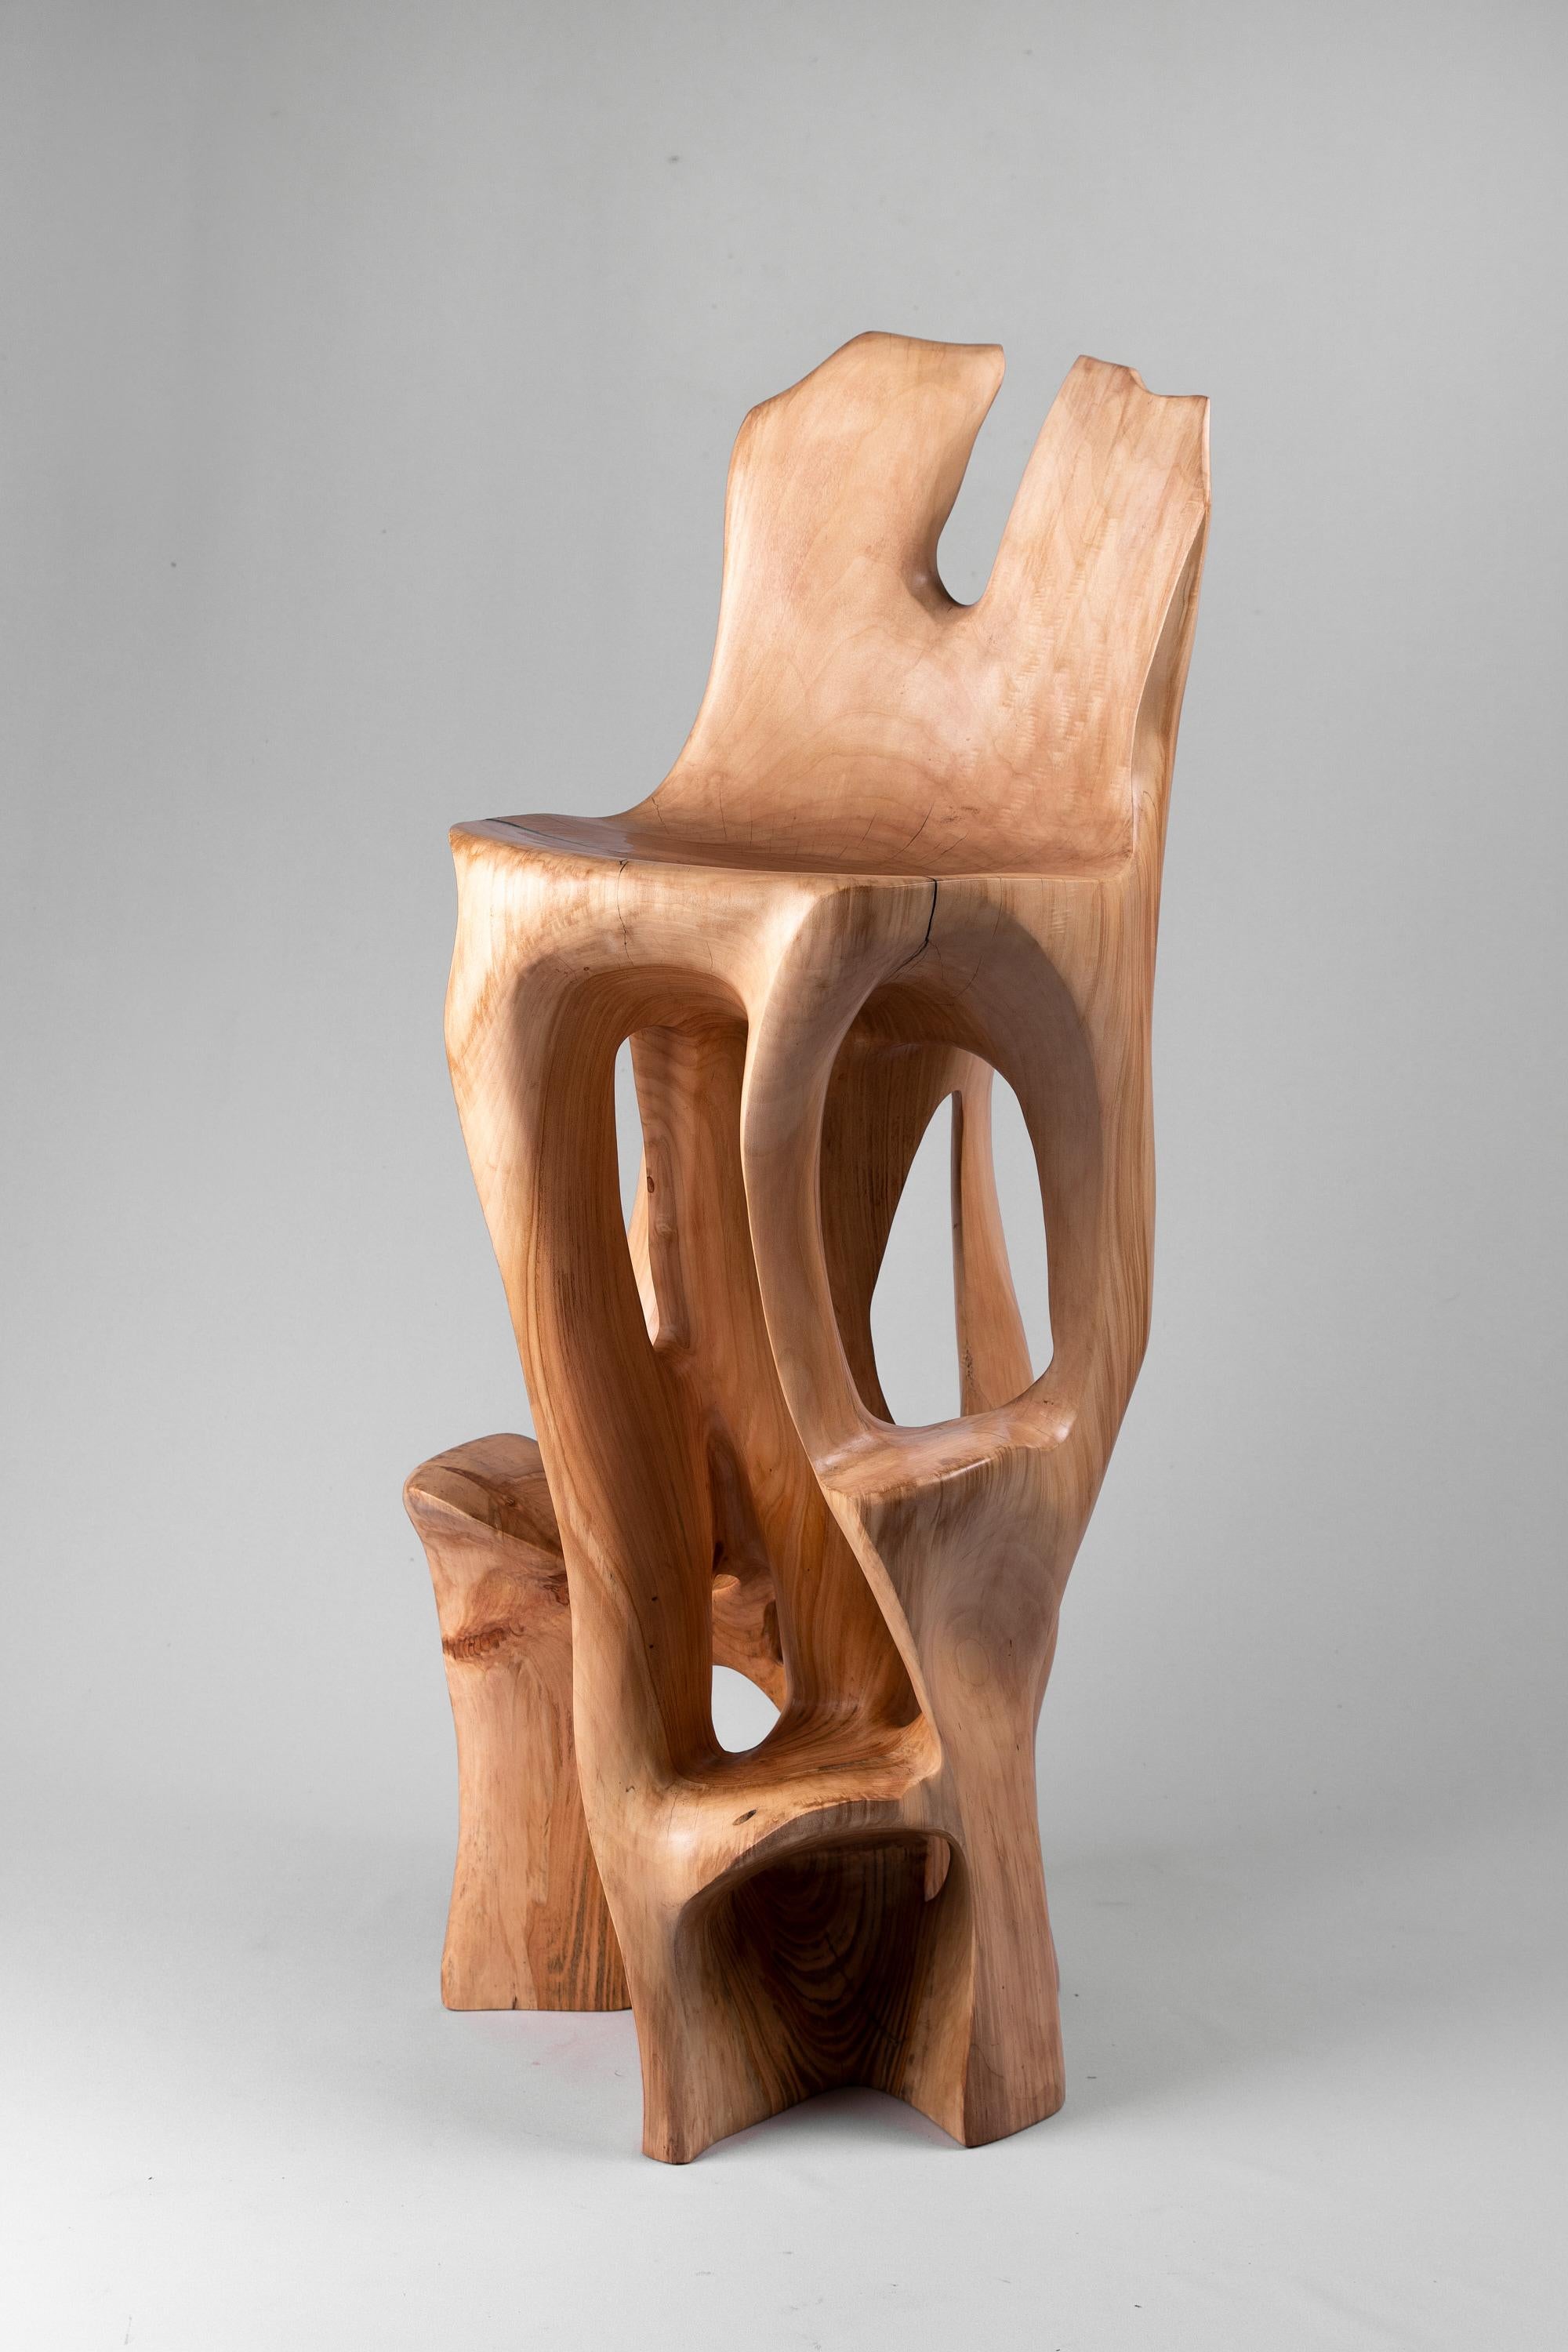 Unique chainsaw carved wooden functional sculpture usable as a bar chair. Carved from a single piece of wood and protected with the highest quality oils, ensuring durability for generations. Such unique handmade design will highlight your interior